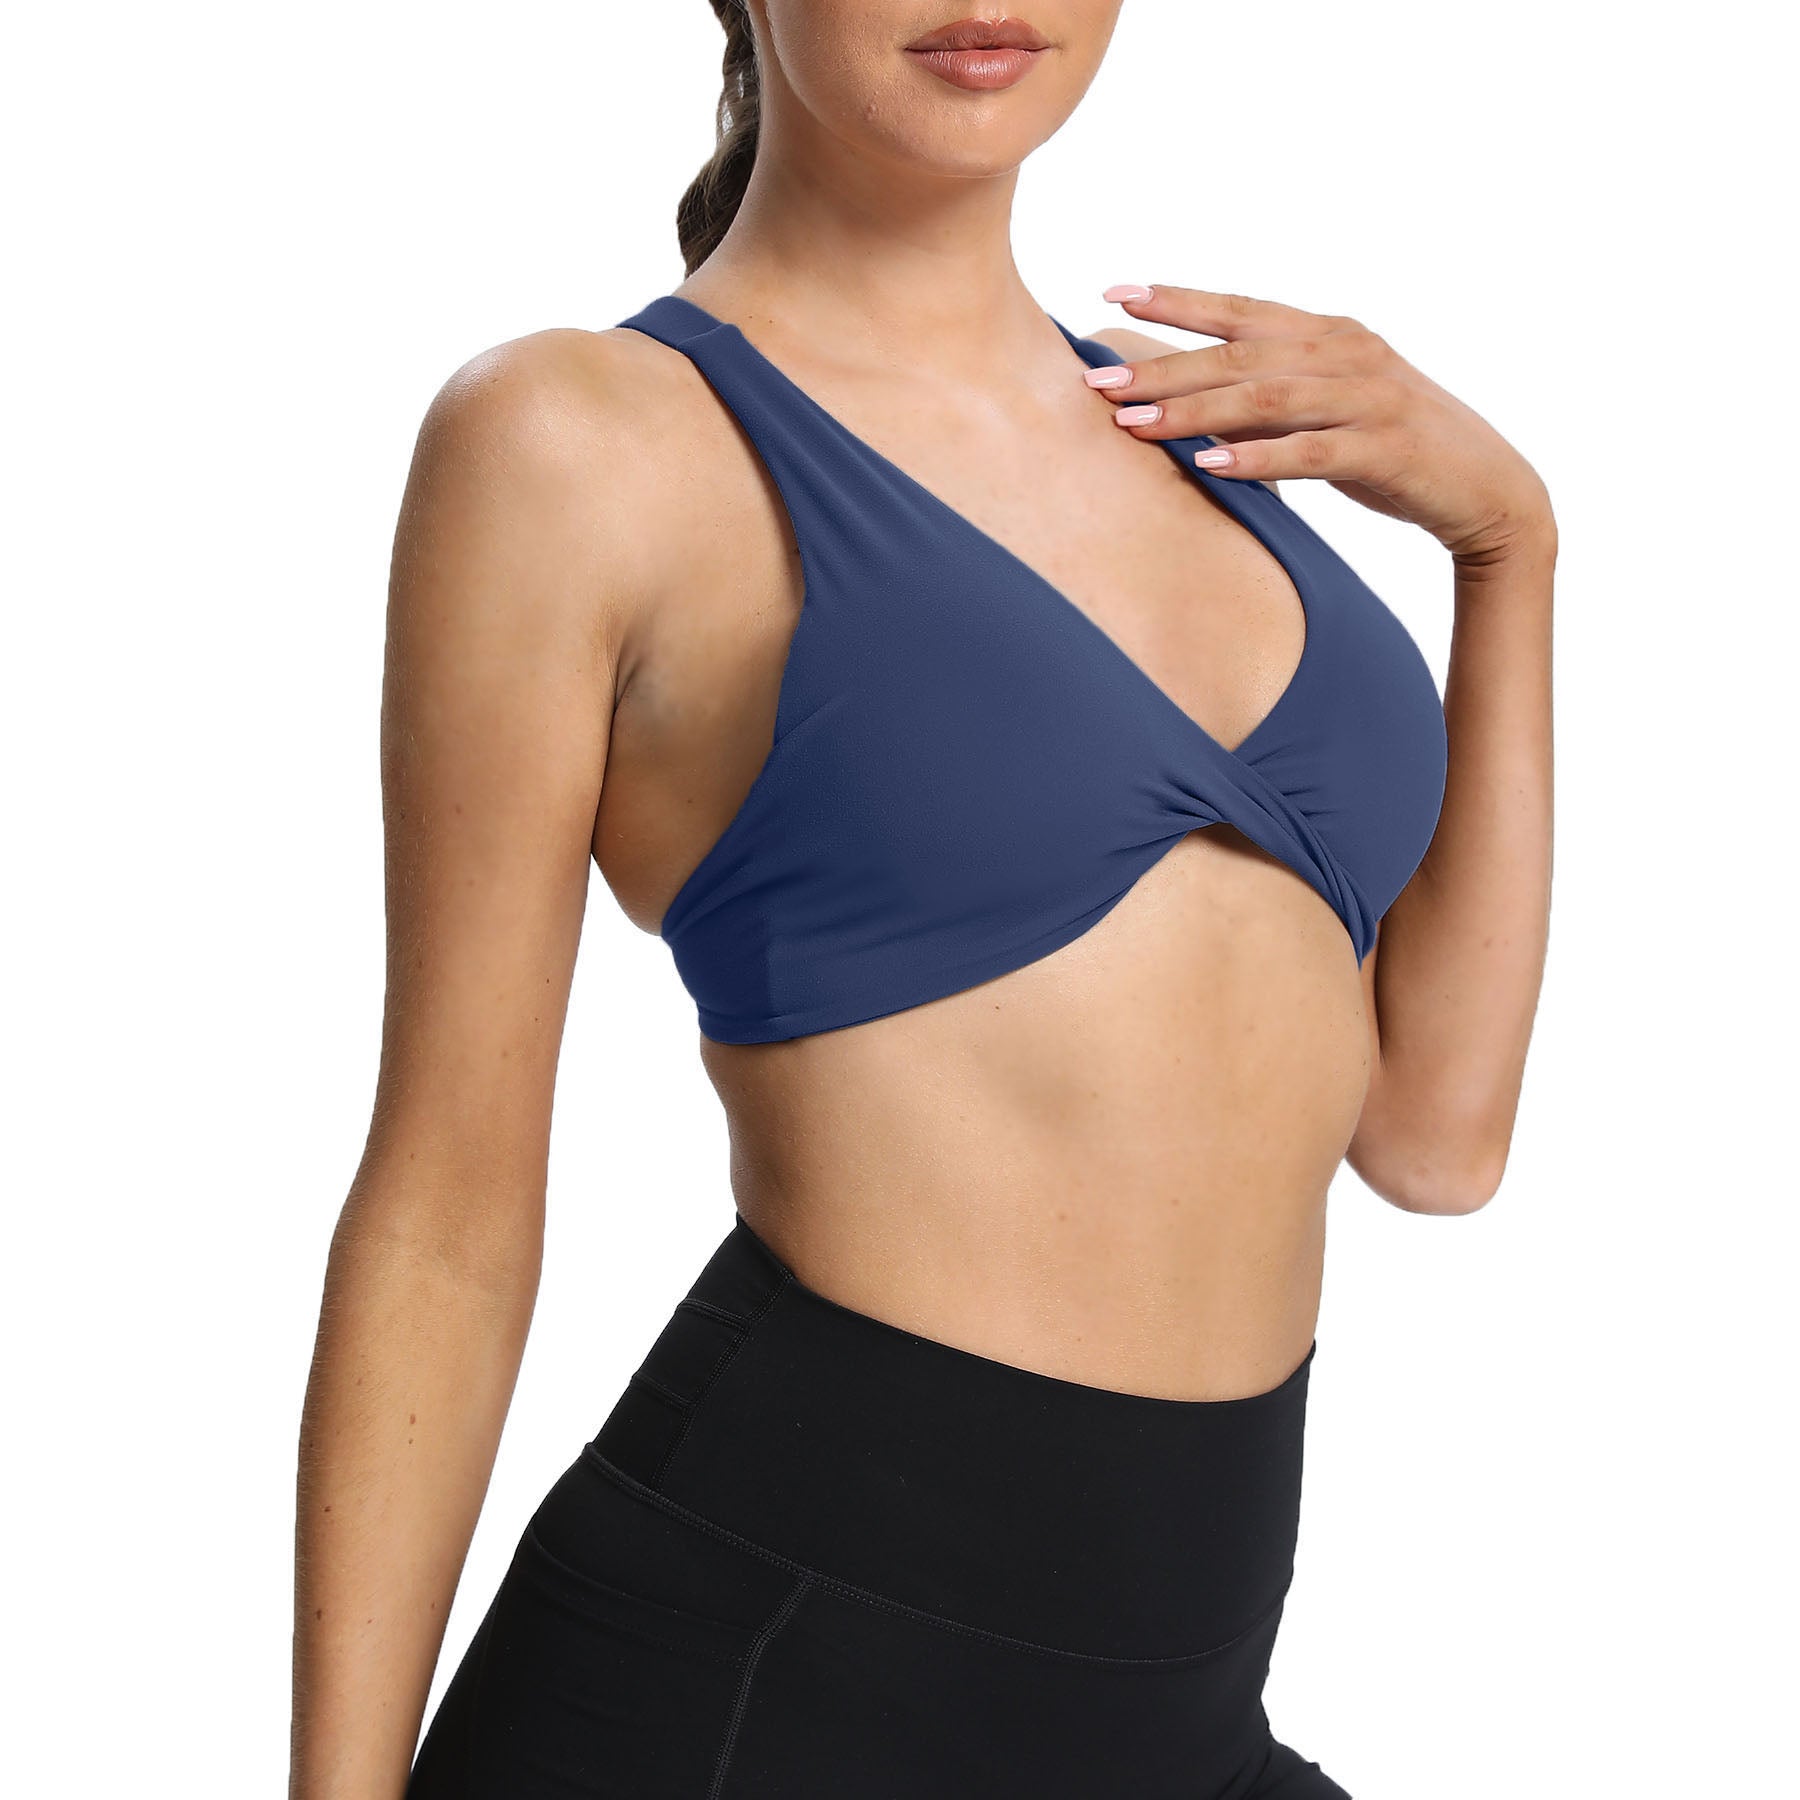 Aoxjox Sports Bra Red Size XS - $10 (68% Off Retail) - From Samantha